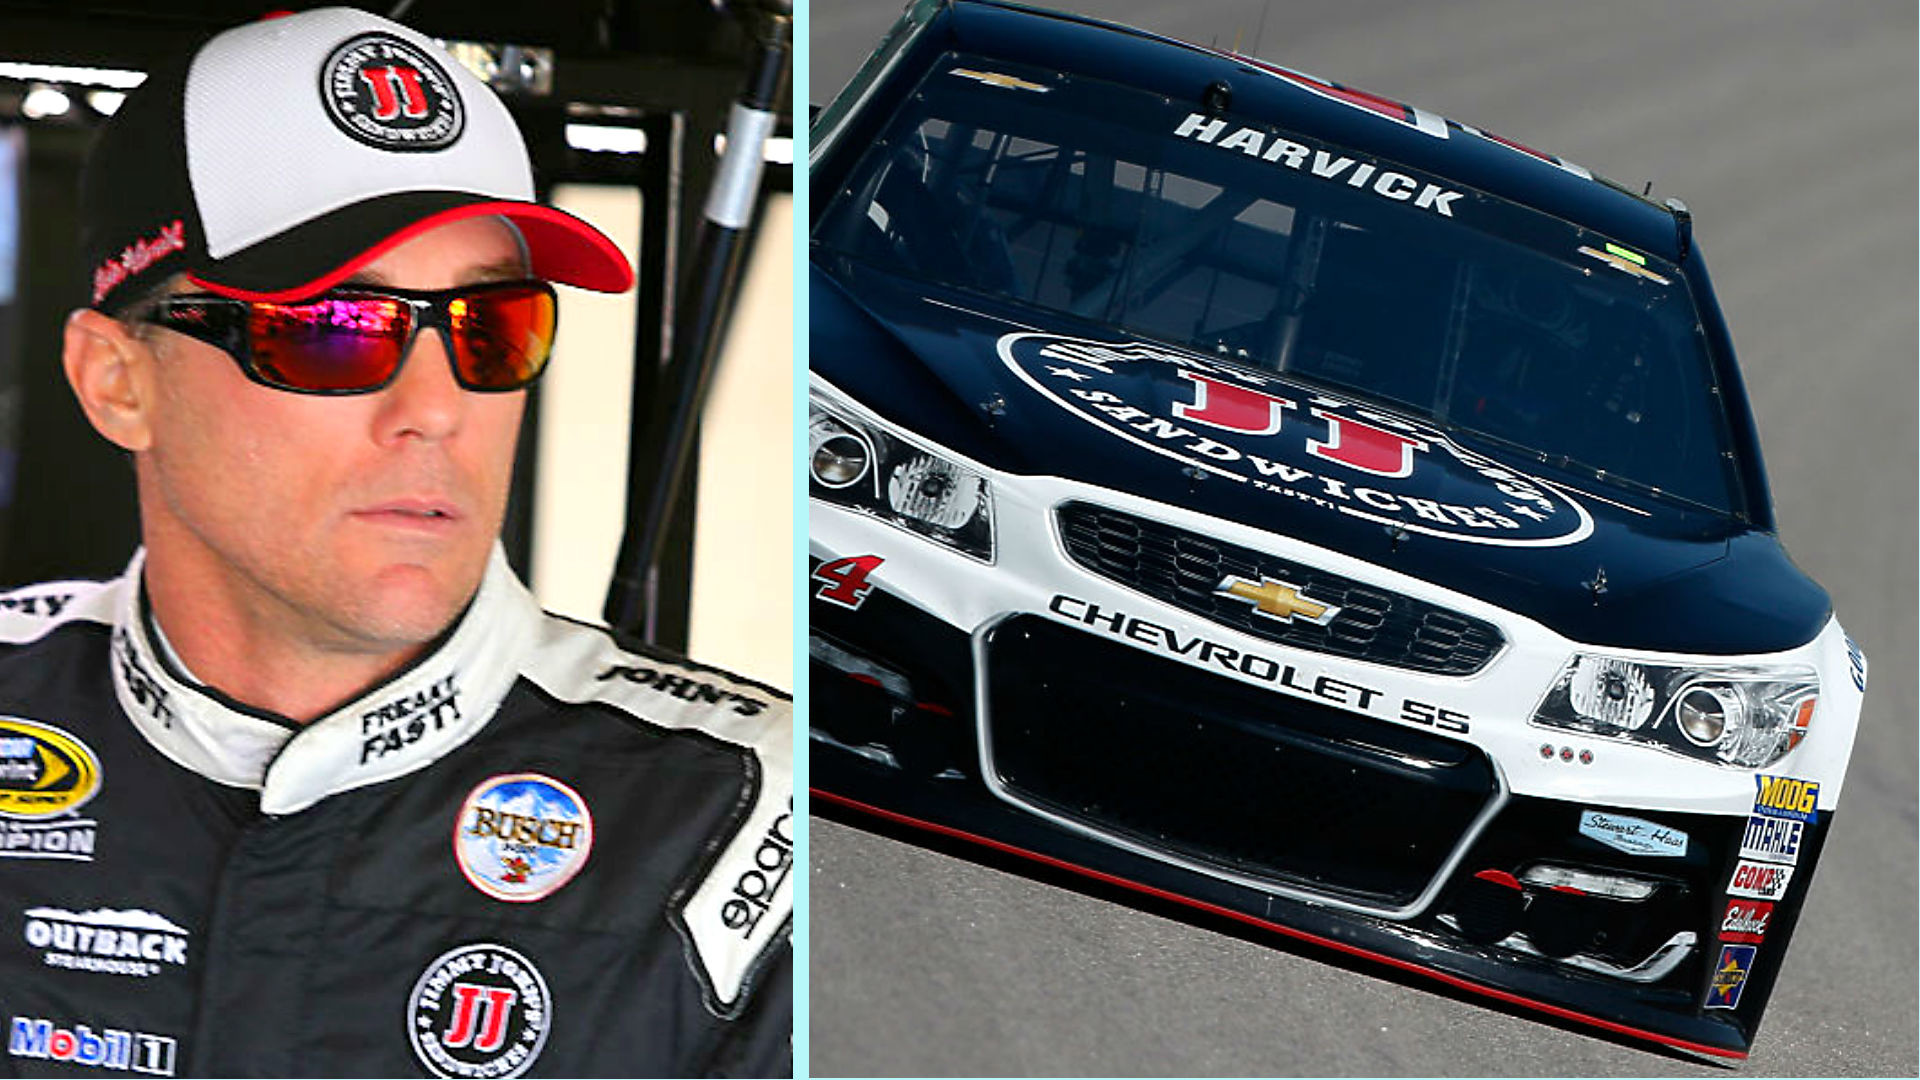 1920x1080 Kevin Harvick and his car (Getty Images)